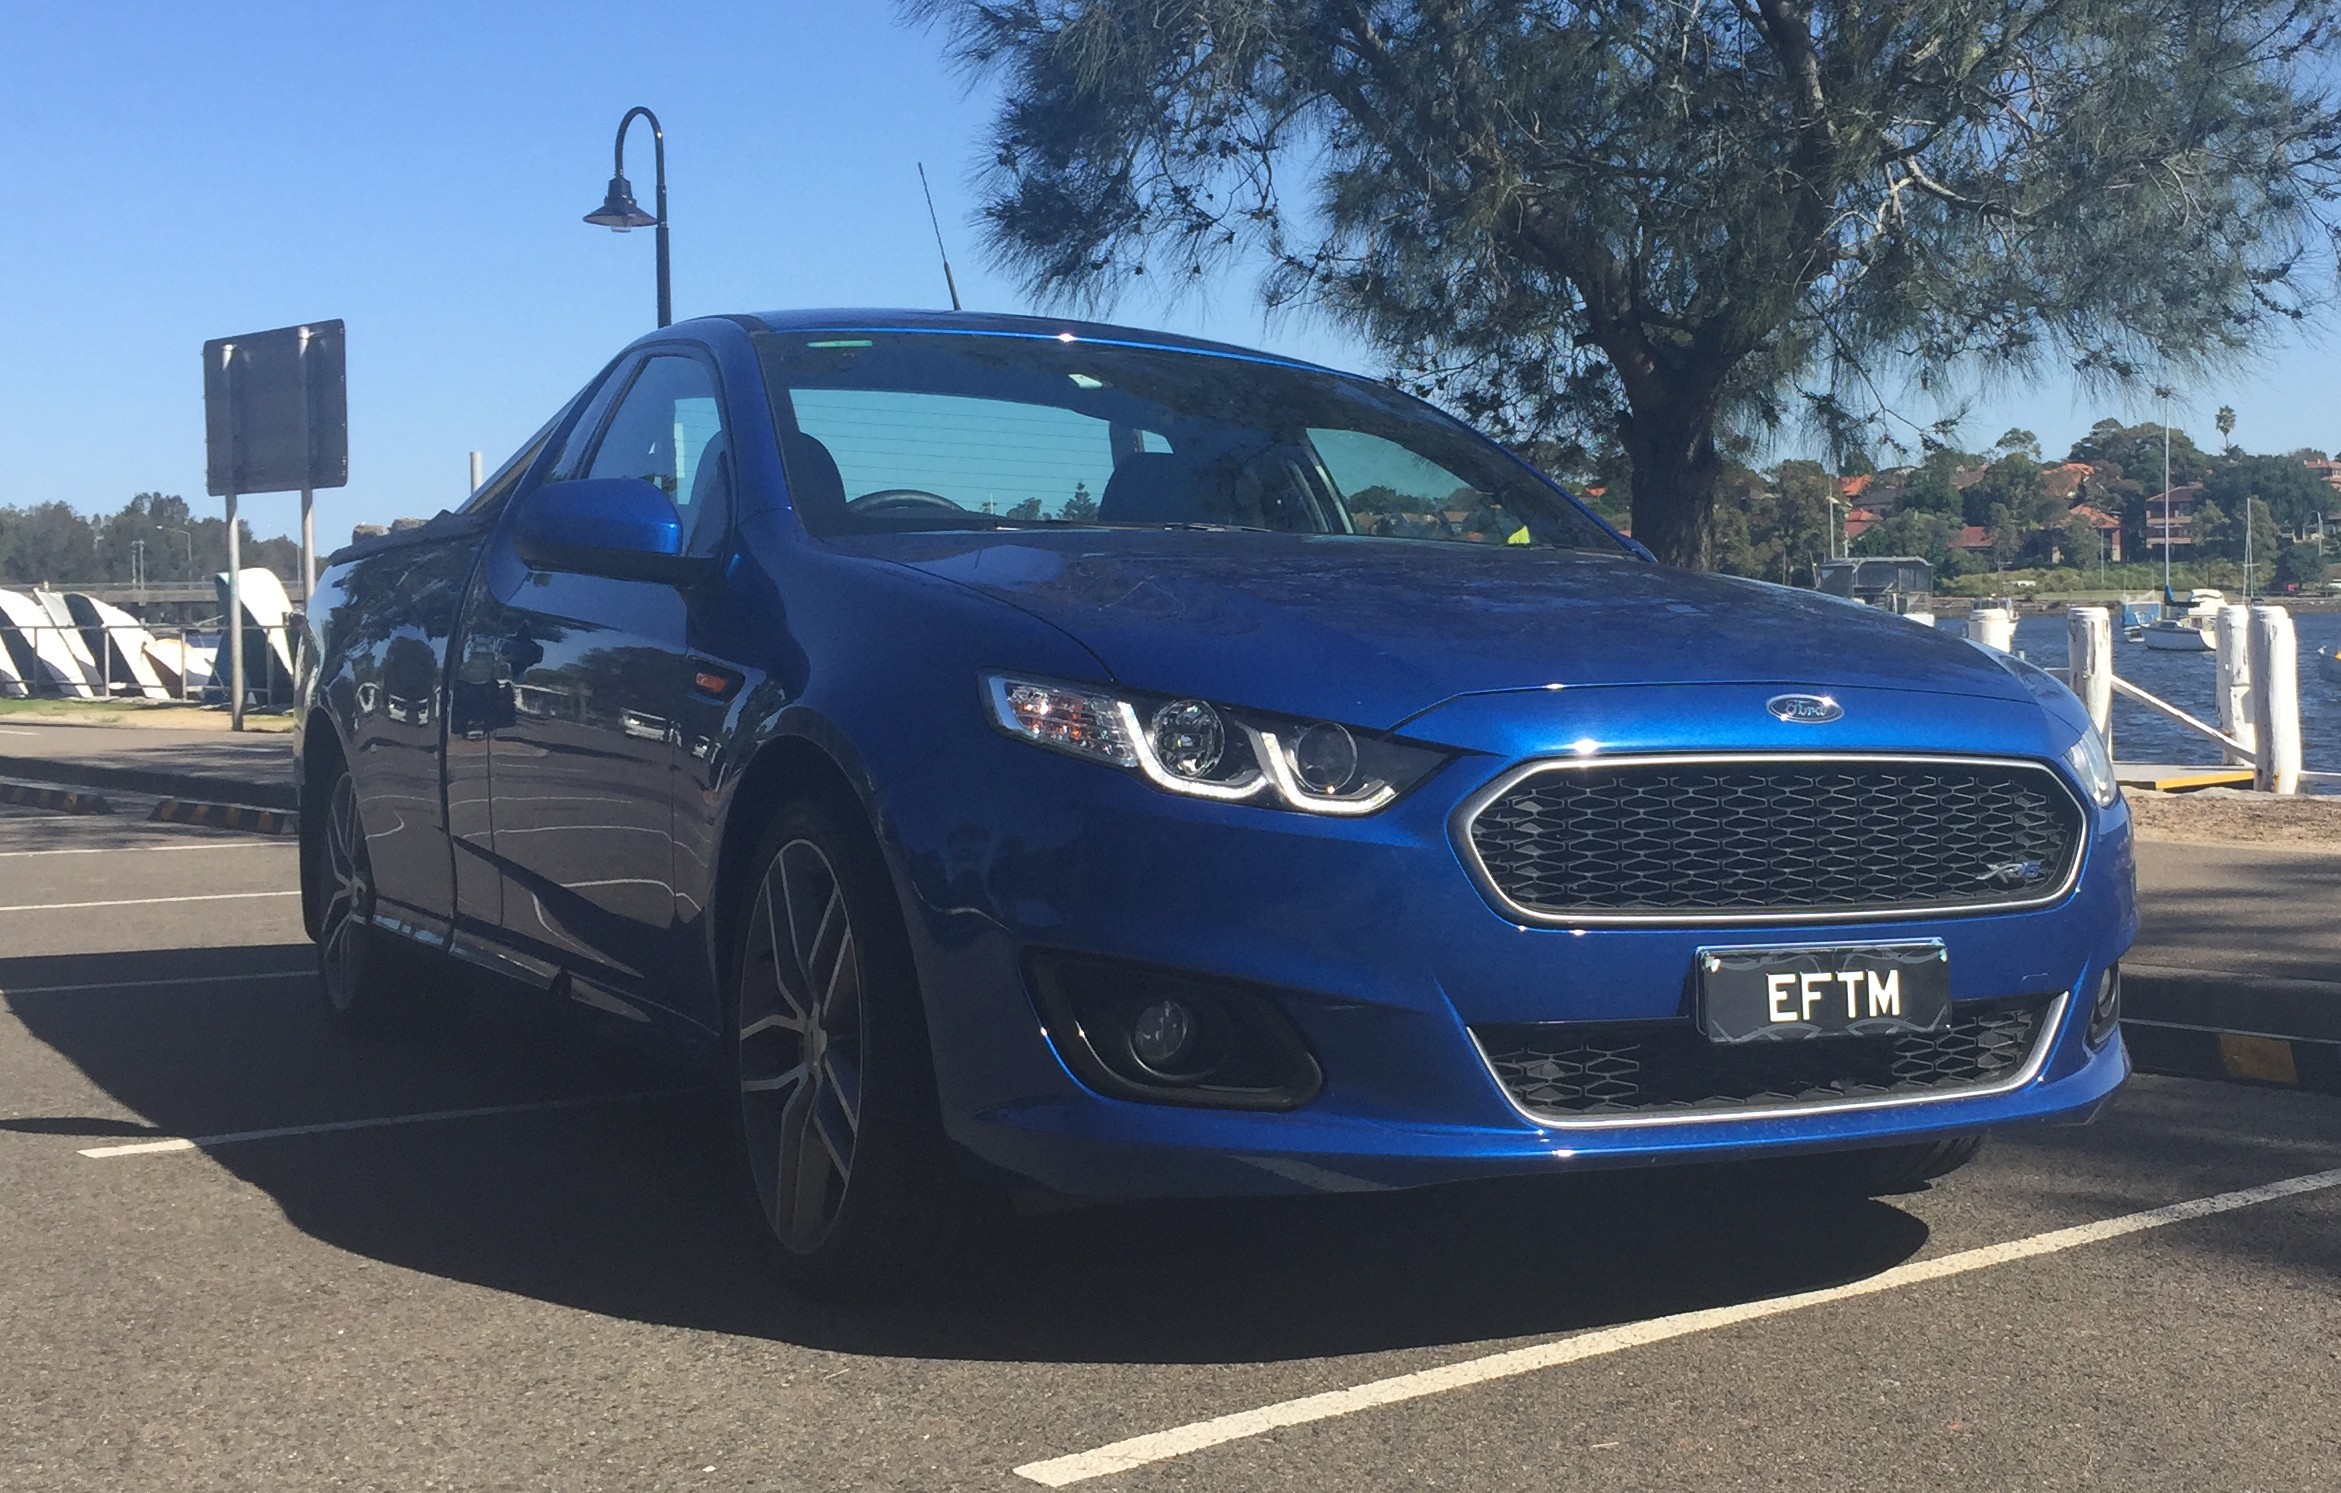 Load It Up Ford Falcon Xr6 Ecolpi Ute Review Eftm